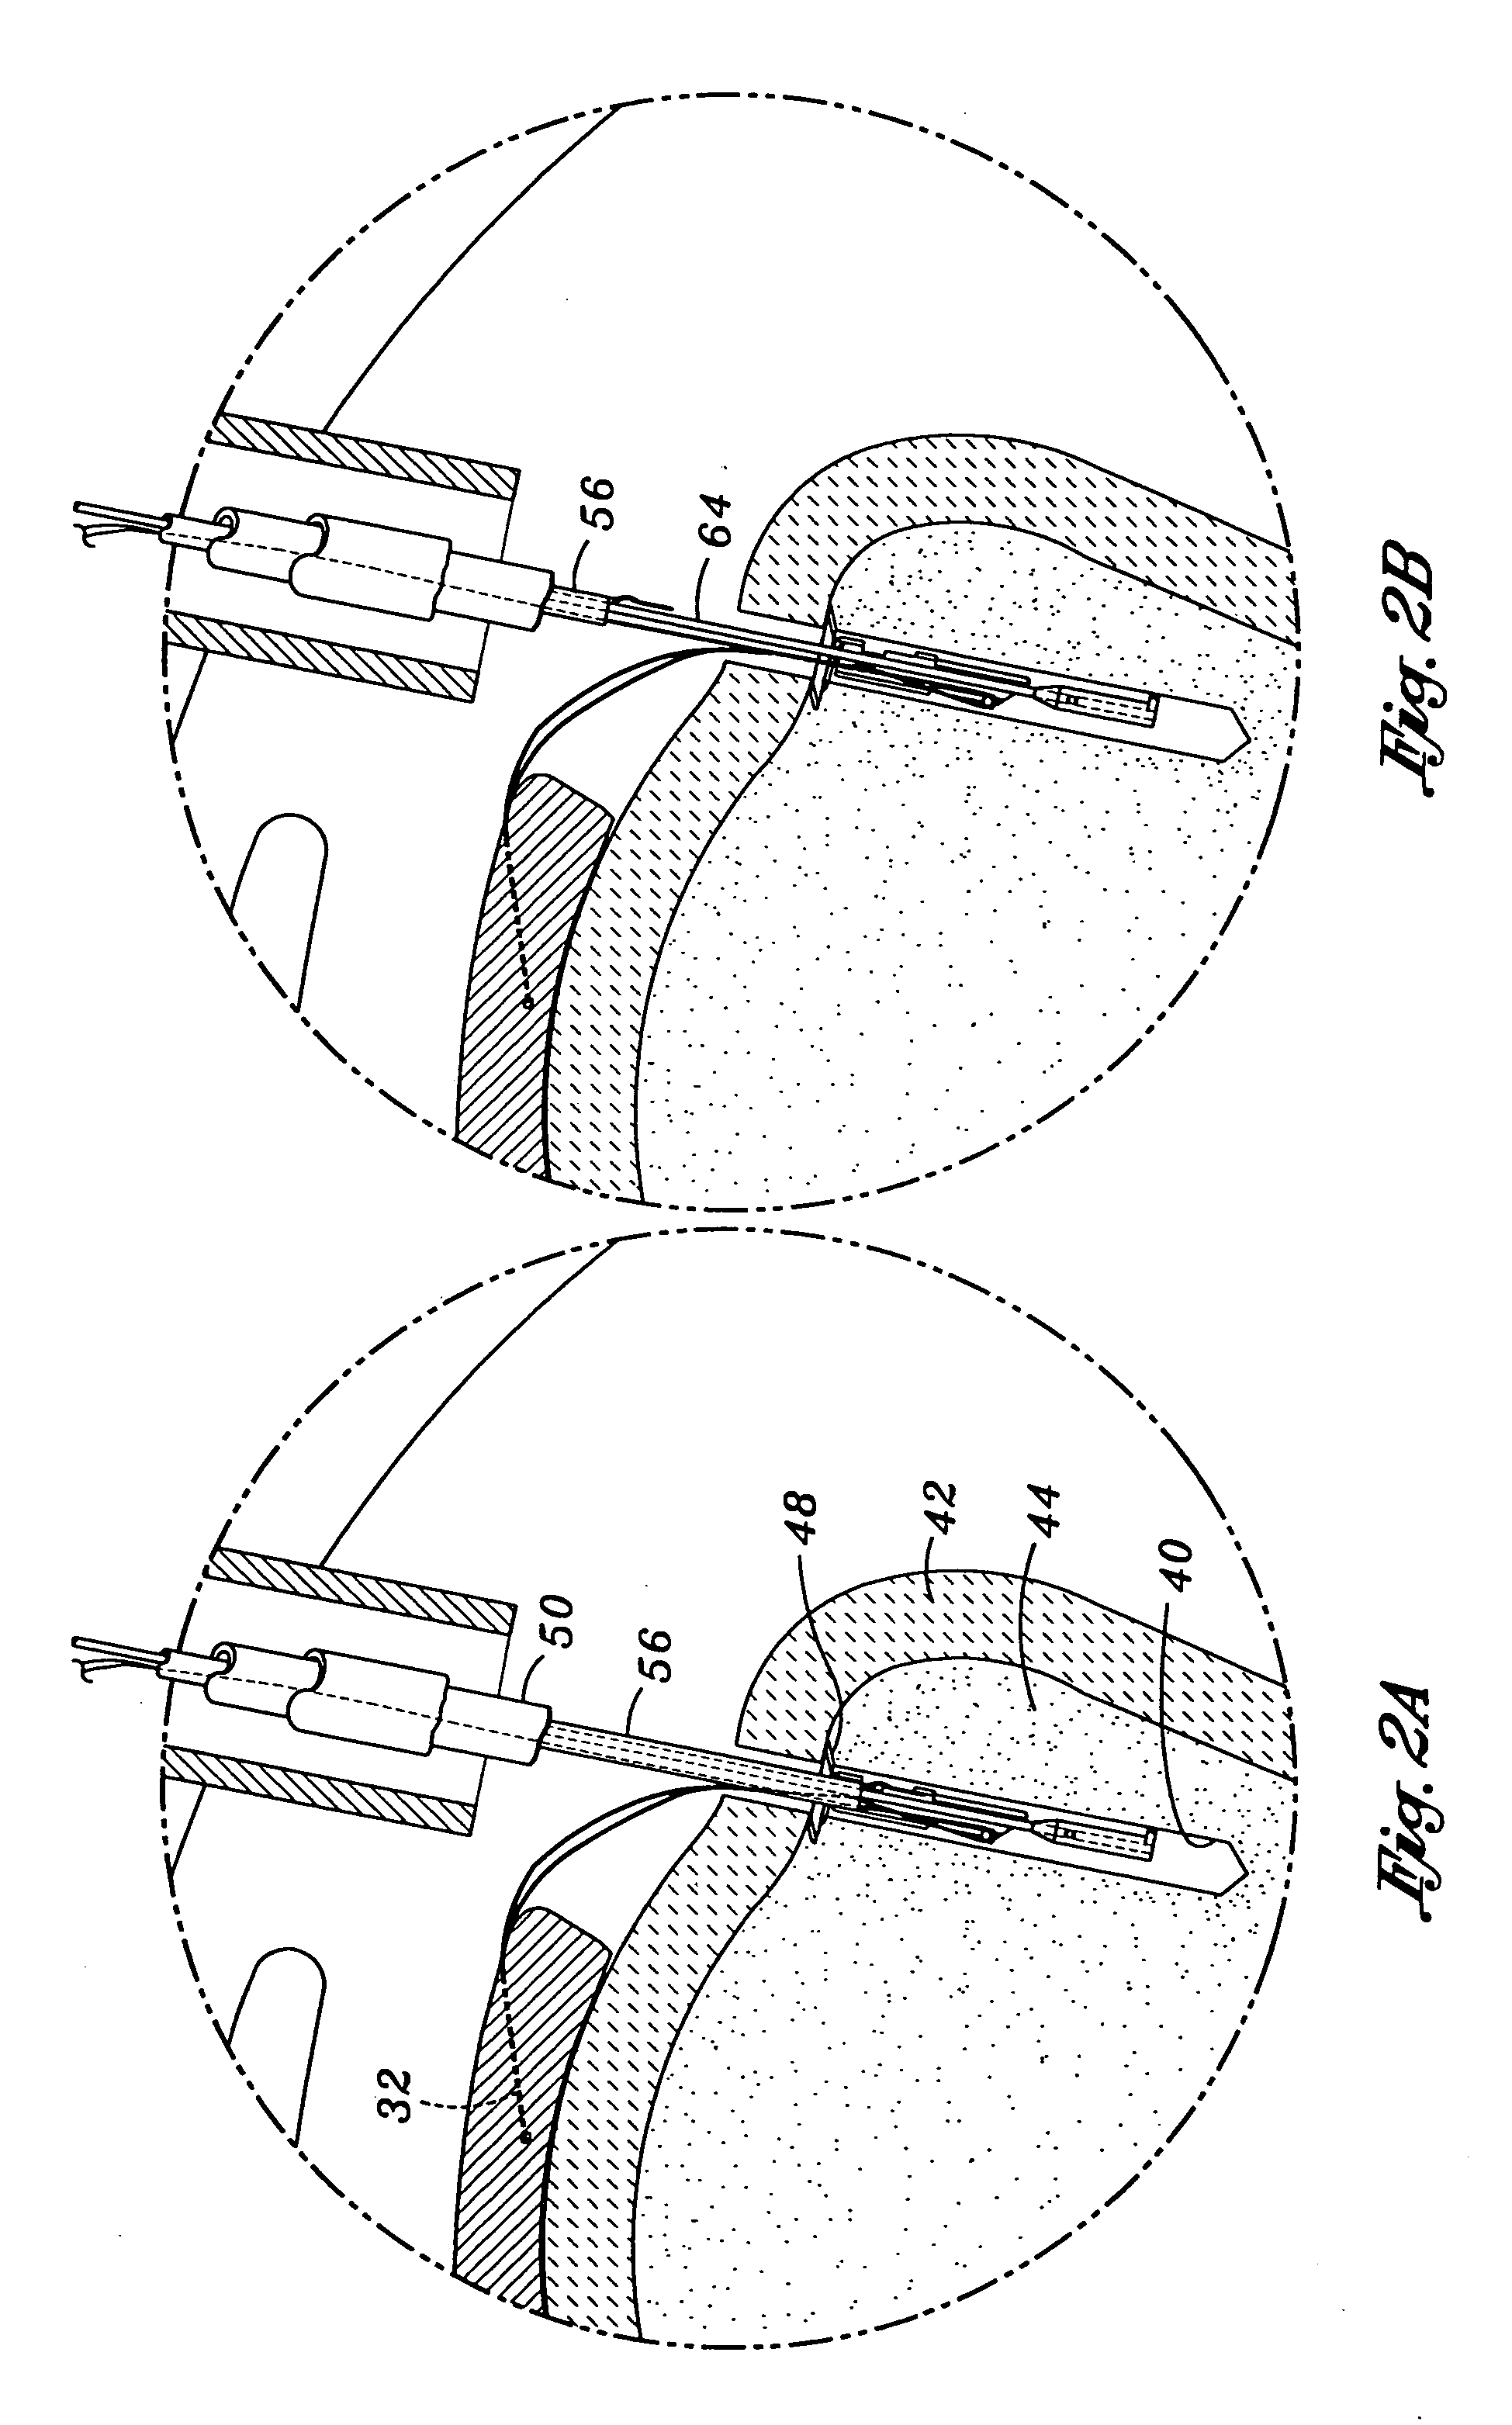 Knotless suture lock apparatus and method for securing tissue